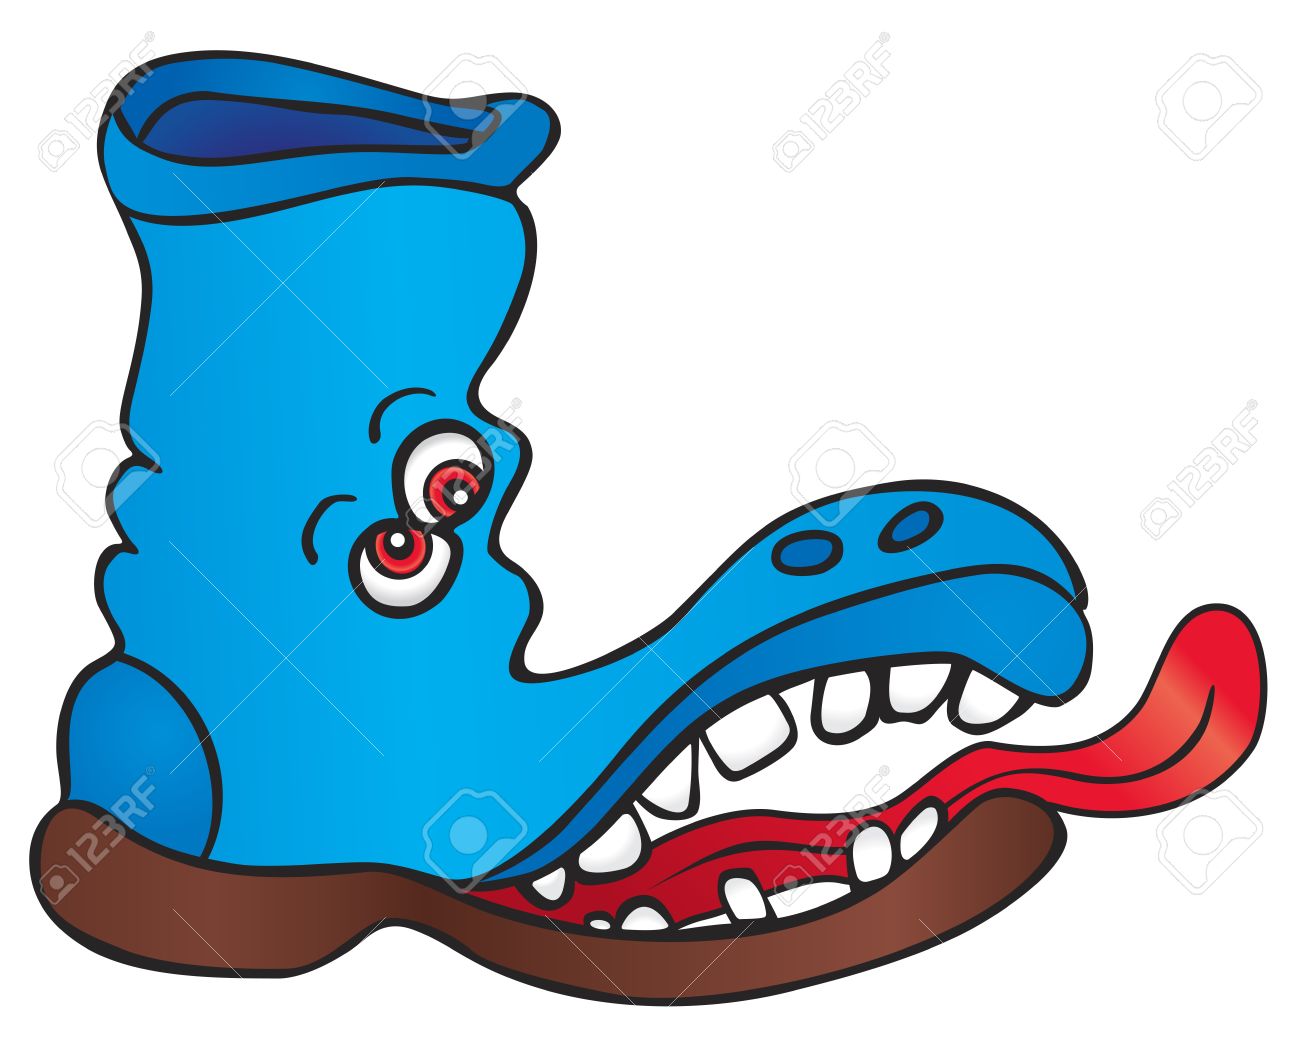 funny shoe clipart - photo #6